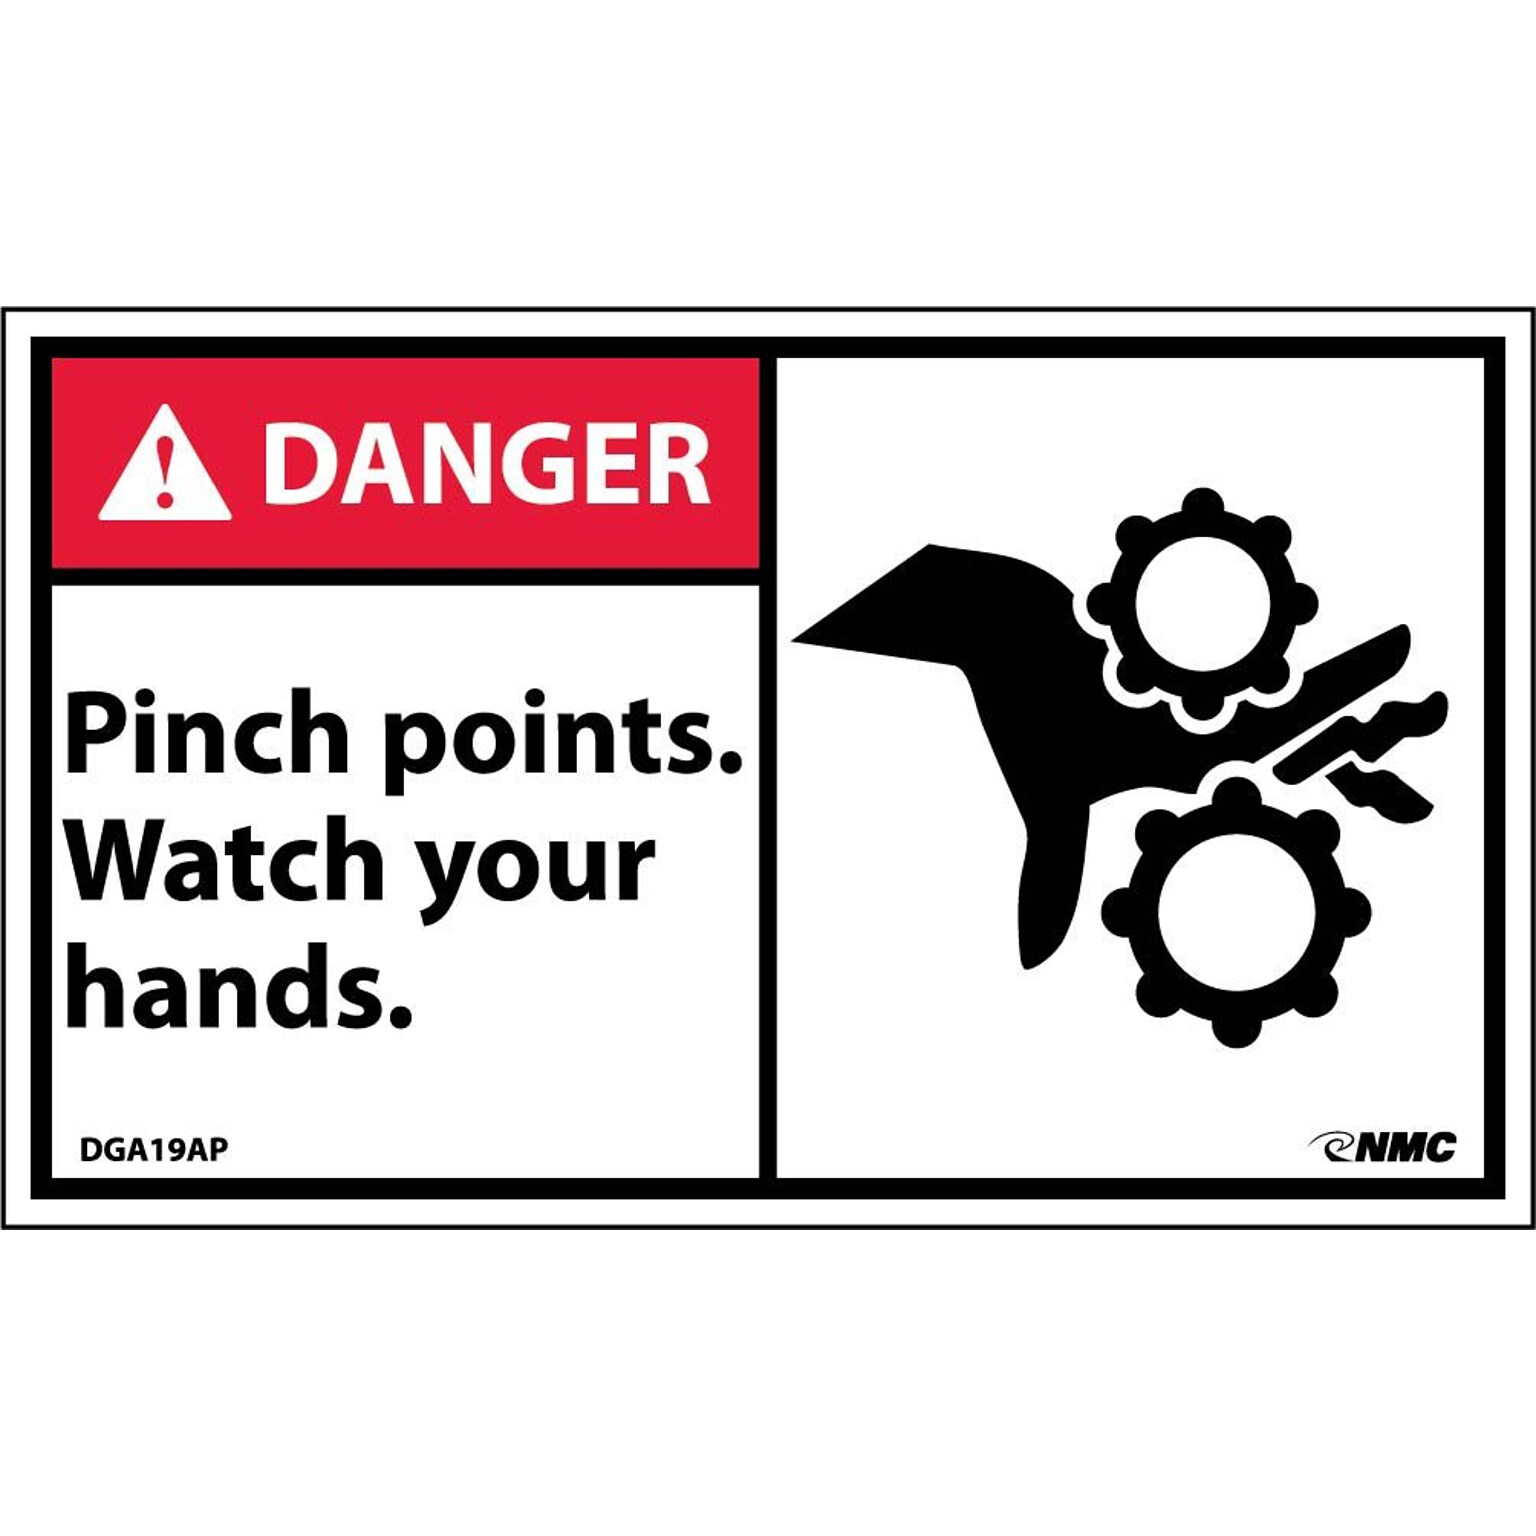 Danger Labels; Pinch Points Watch Your Hands (Graphic), 3X5, Adhesive Vinyl, 5/Pk